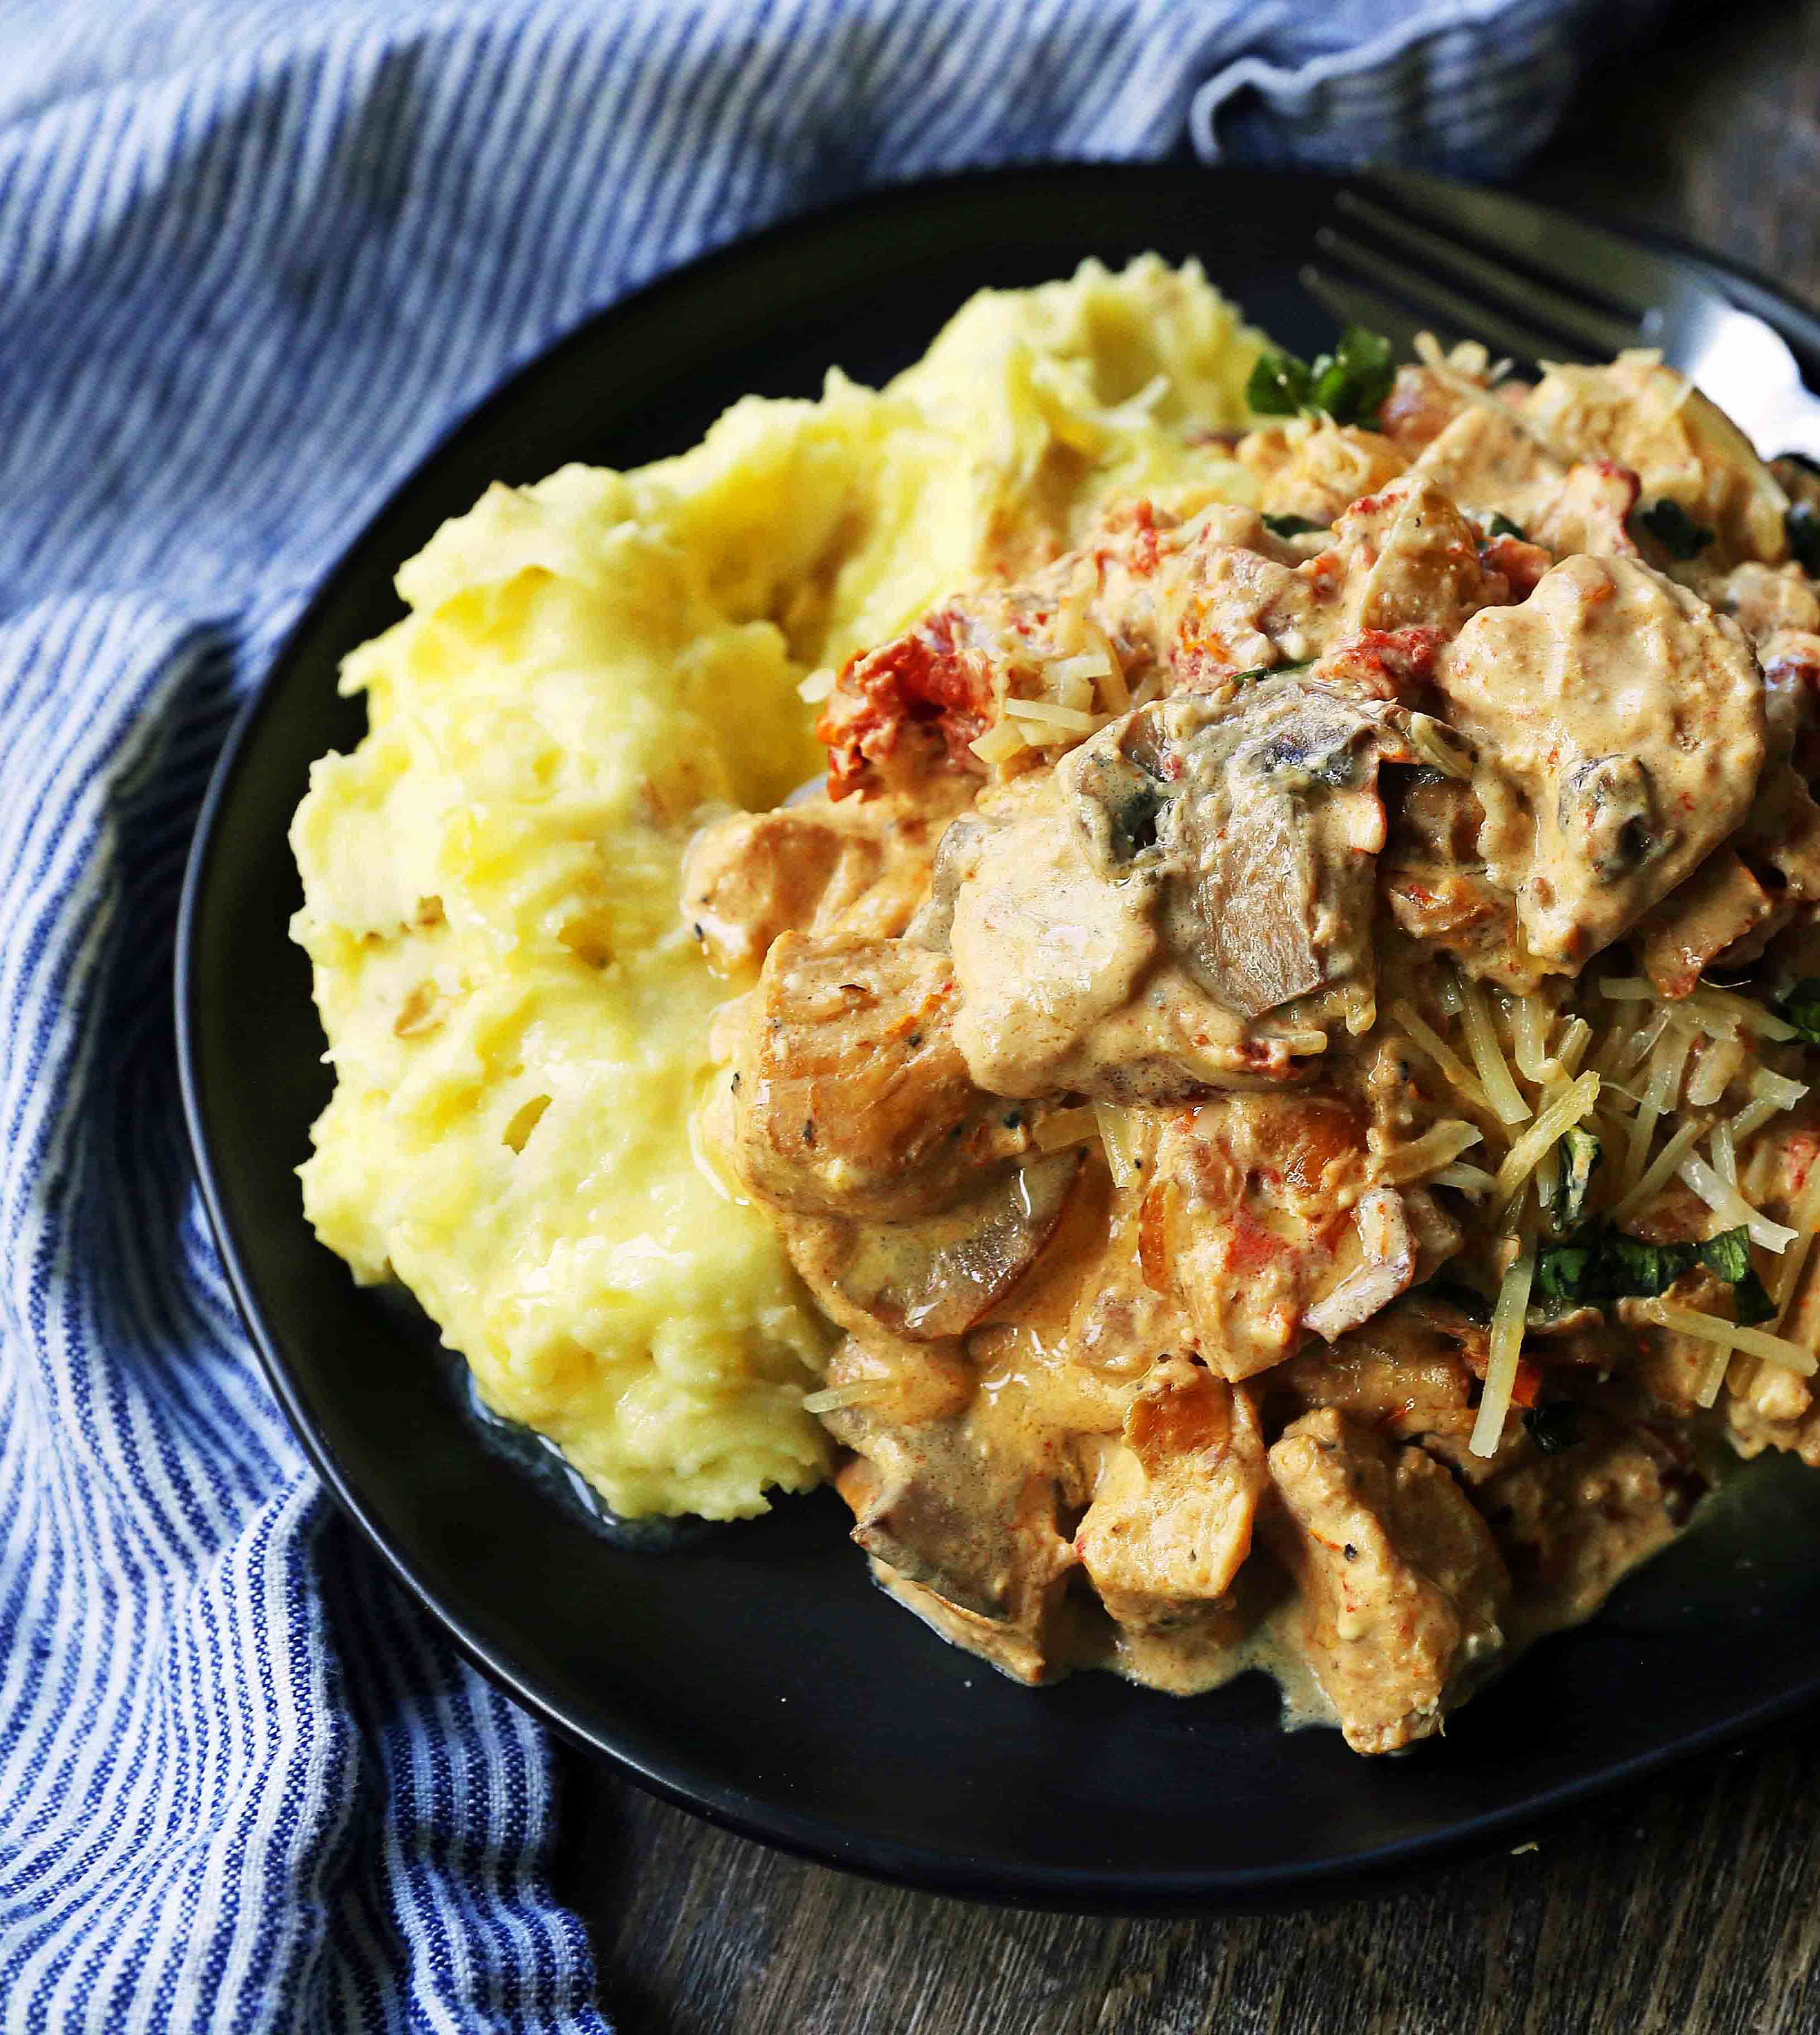 Slow Cooker Creamy Tuscan Chicken. Creamy tender chicken in prosciutto, mushroom, and sundried tomato cream sauce. Comfort food made in a slow cooker. www.modernhoney.com #dinner #slowcooker #slowcookerchicken #chickendinnerrecipes #creamychicken